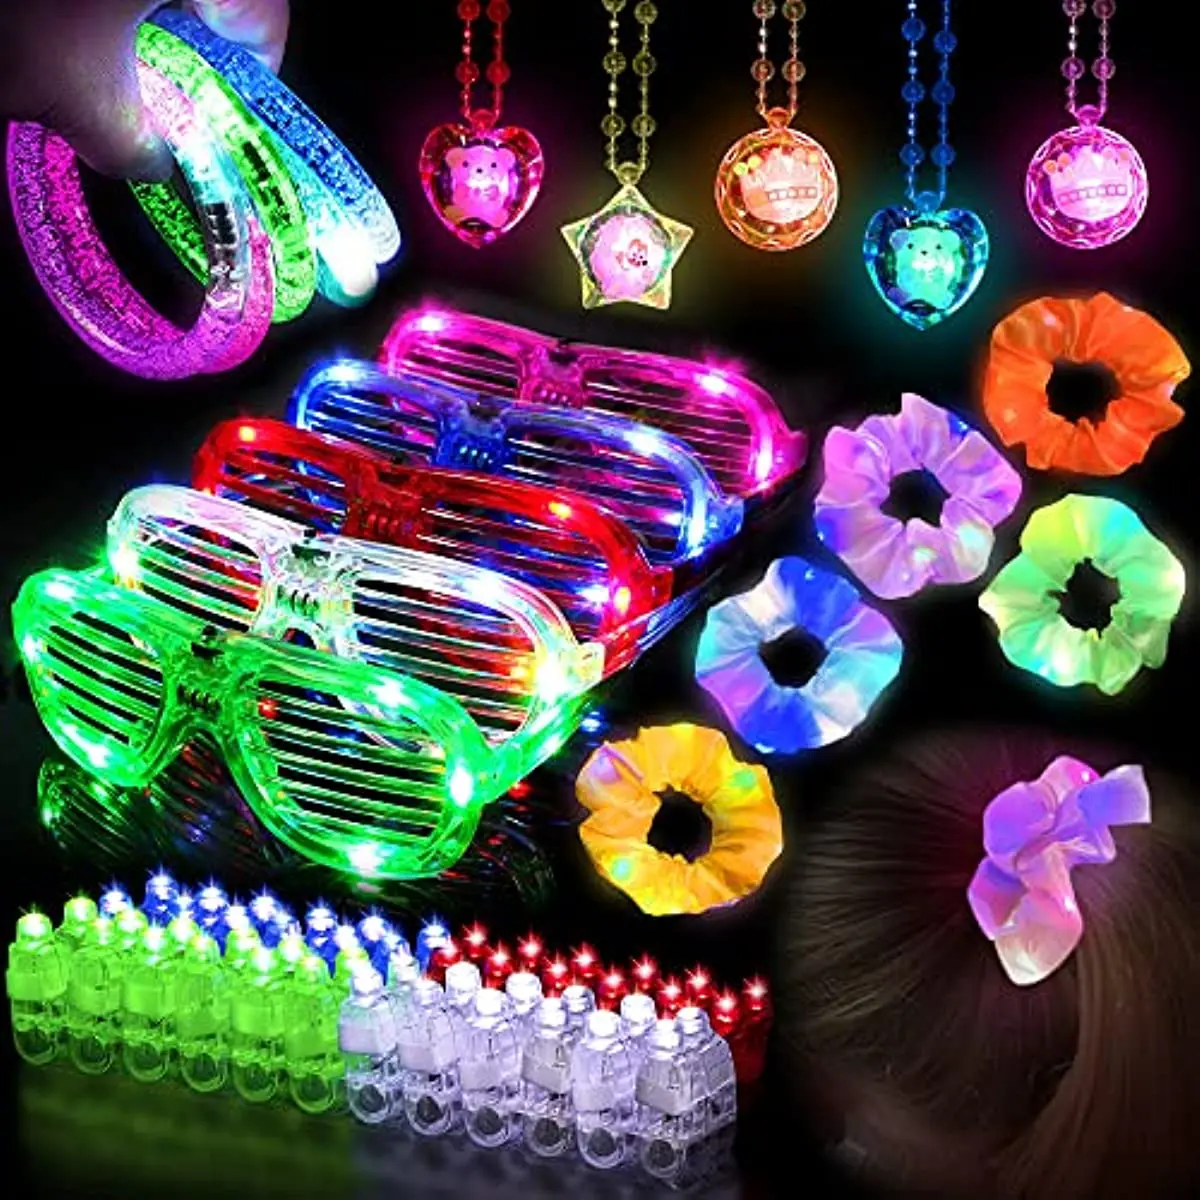 

Glow Bracelets Up Light Wedding Birthday Supplies Glow The In Neon Glowing Party Finger Party Light Dark 68pcs Necklace Glasses